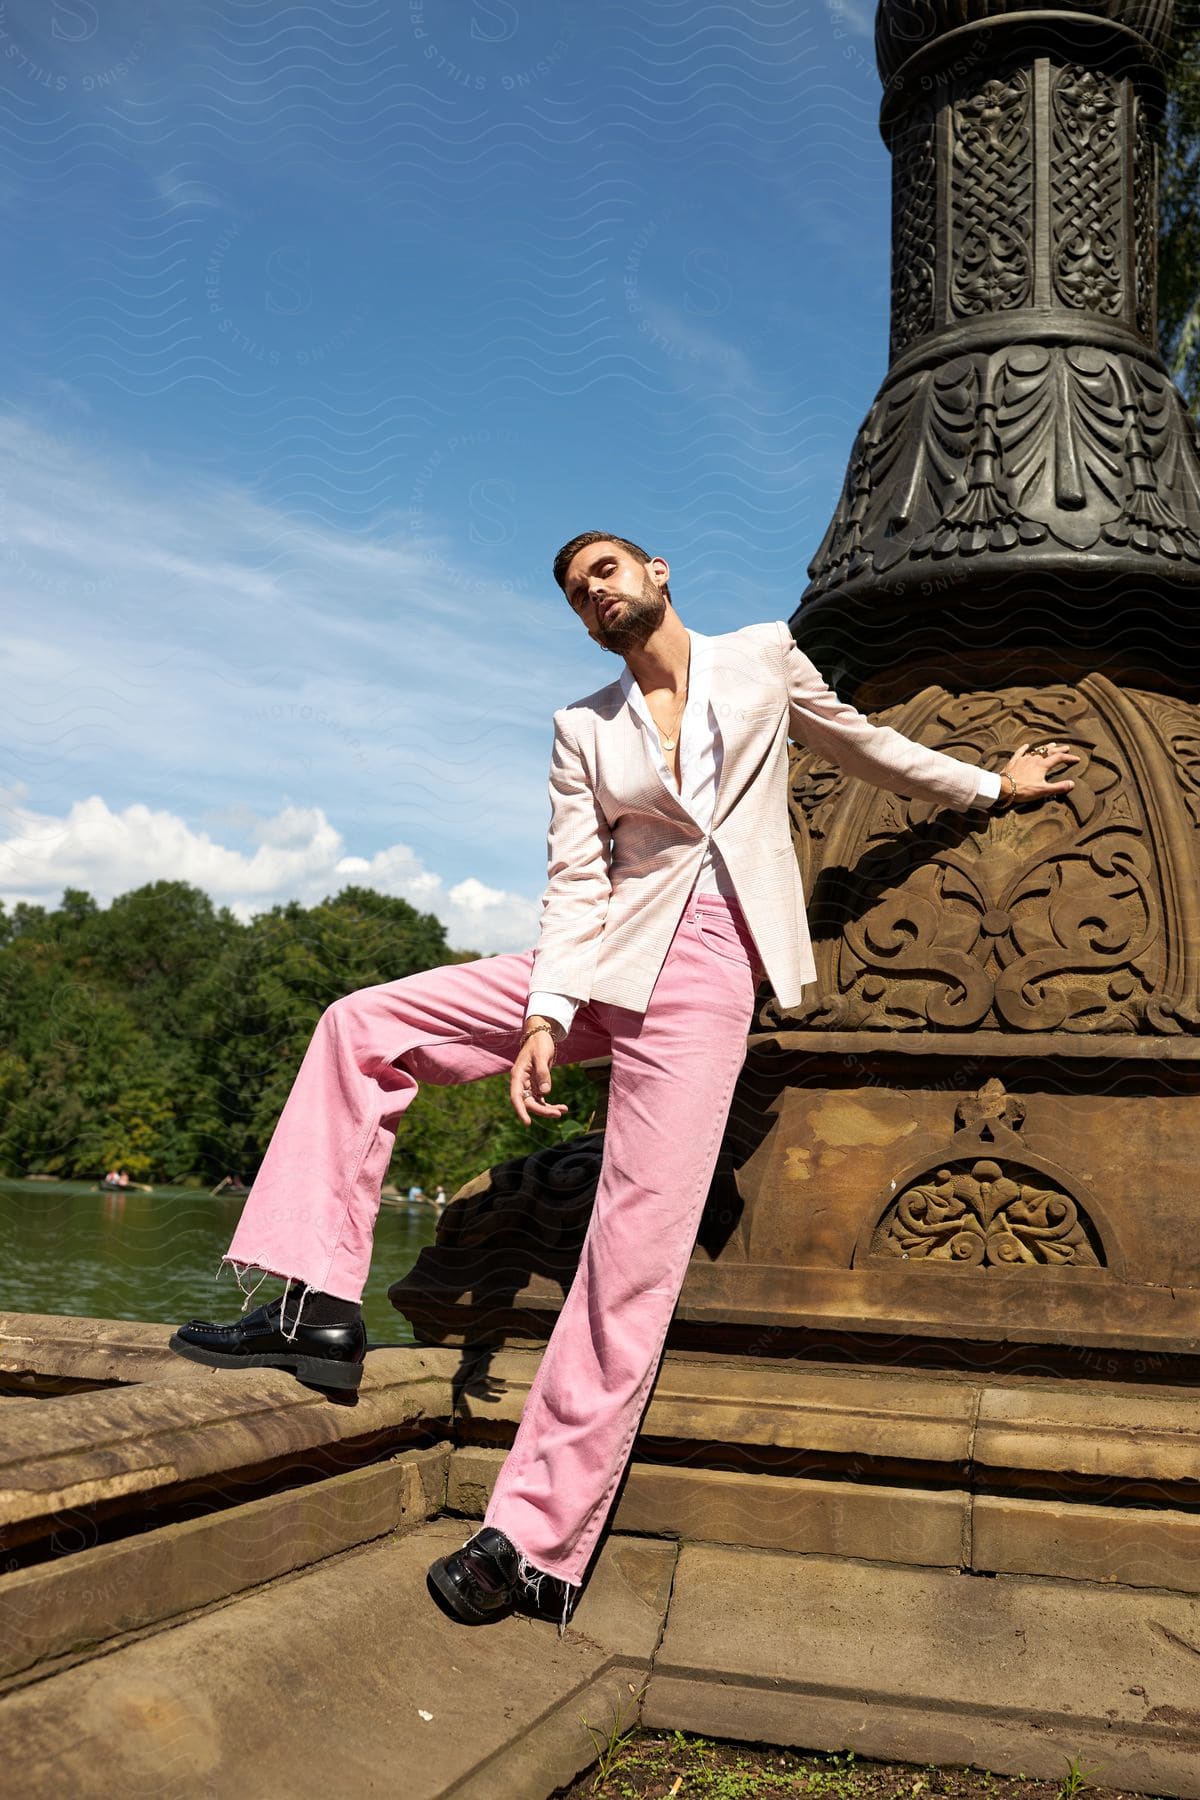 Model man posing in a blazer and a pink sidewalk next to a monument on the edge of a lake.